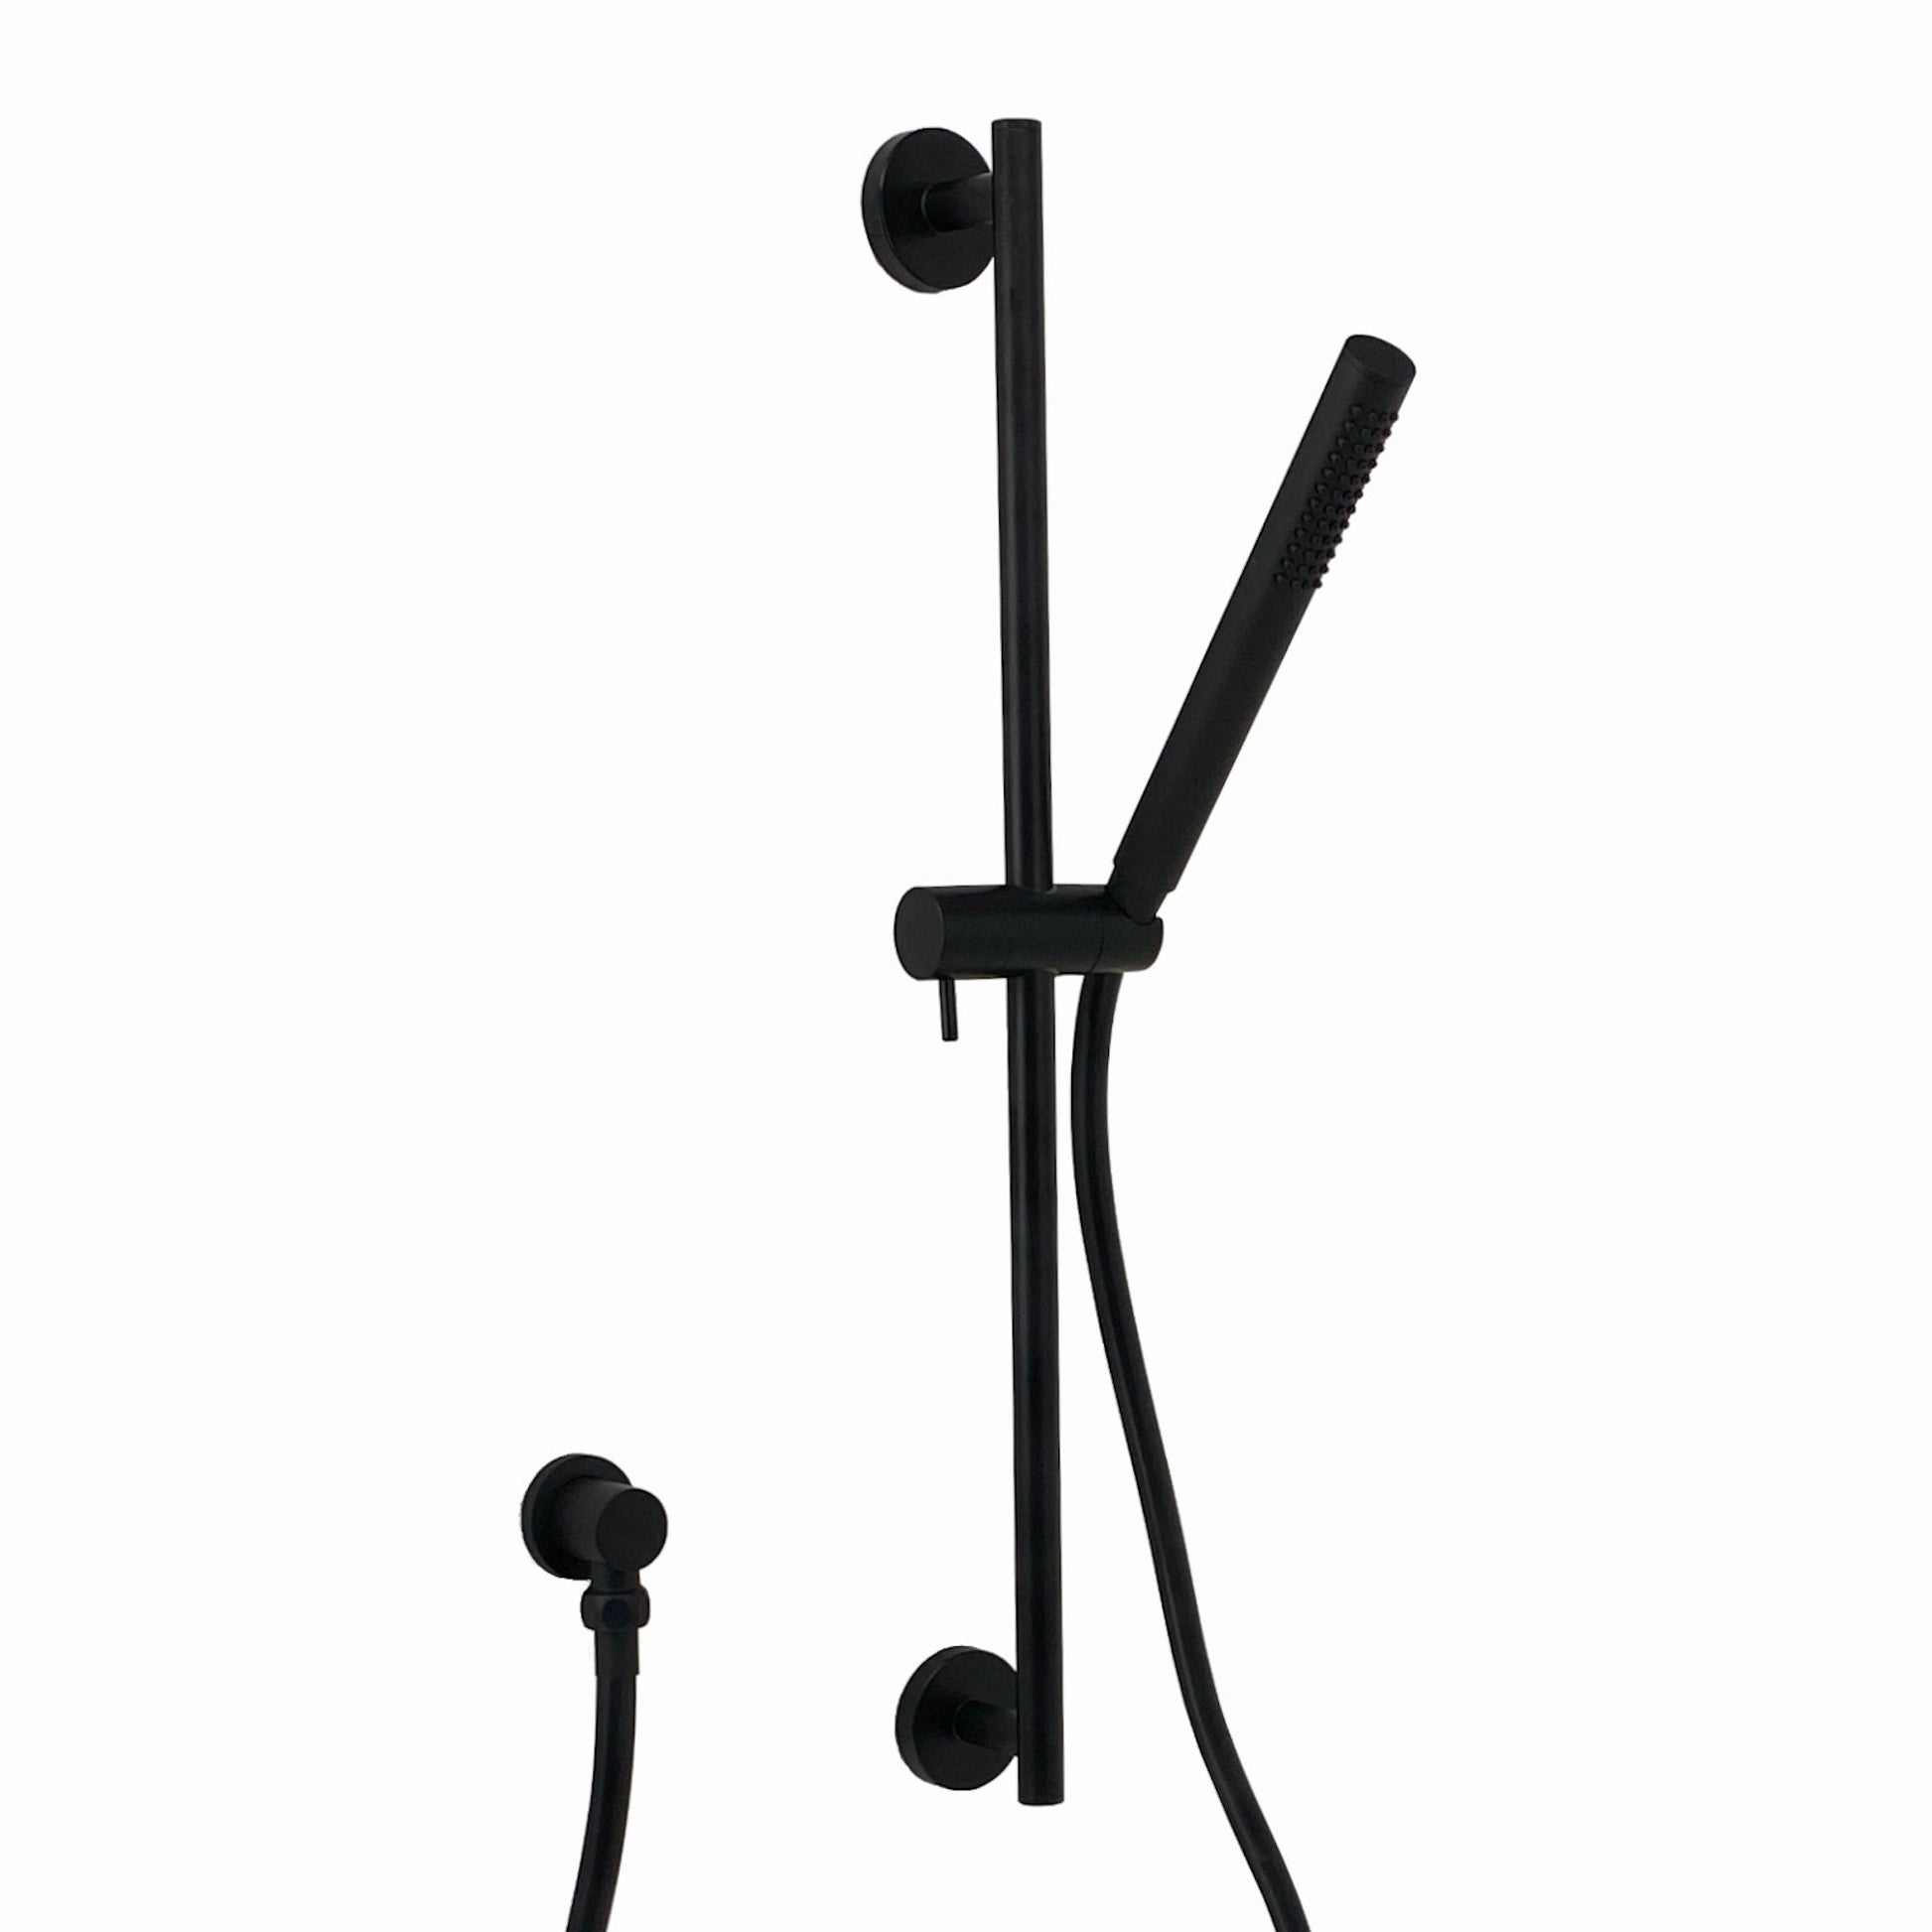 SH0313-04-SH0369-04-ES022-01-contemporary-shower-slider-riser-rail-kit-with-pencil-shower-head-hose-and-wall-elbow-matte-black